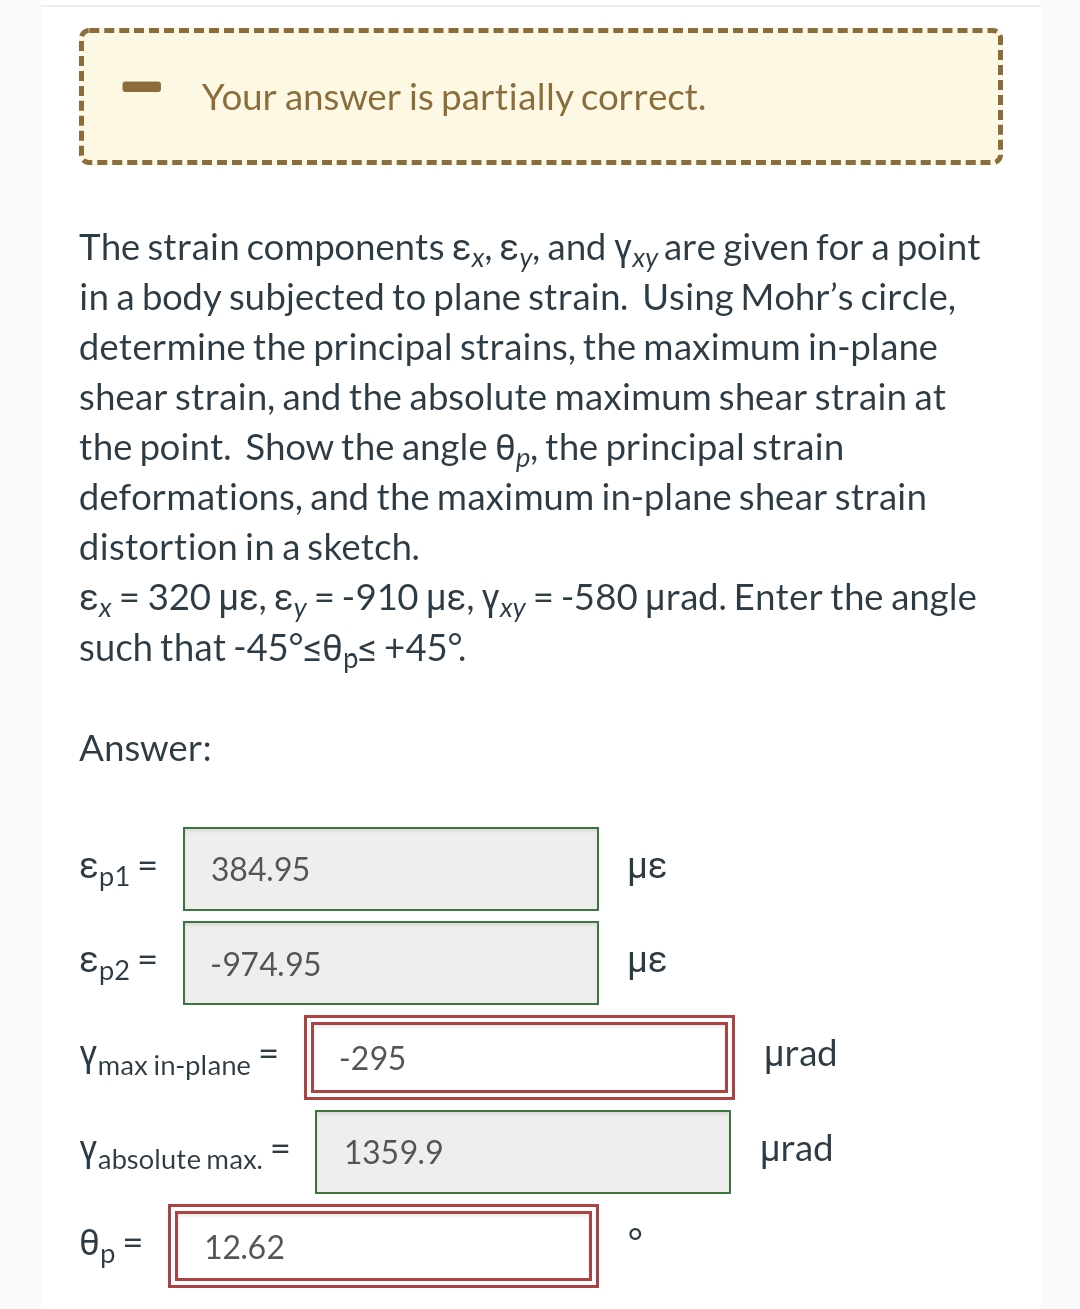 Your answer is partially correct.
The strain components ɛx, ɛy, and yxy are given for a point
in a body subjected to plane strain. Using Mohr's circle,
determine the principal strains, the maximum in-plane
shear strain, and the absolute maximum shear strain at
the point. Show the angle 0p, the principal strain
deformations, and the maximum in-plane shear strain
distortion in a sketch.
εx-320 με, εy = -910 με, Υν -580 μrad. Enter the angle
such that -45°se,< +45°.
%3D
Answer:
Ep1 =
384.95
Ep2
-974.95
%|
Ymax in-plane
prad
-295
Yabsolute max.
1359.9
prad
12.62
